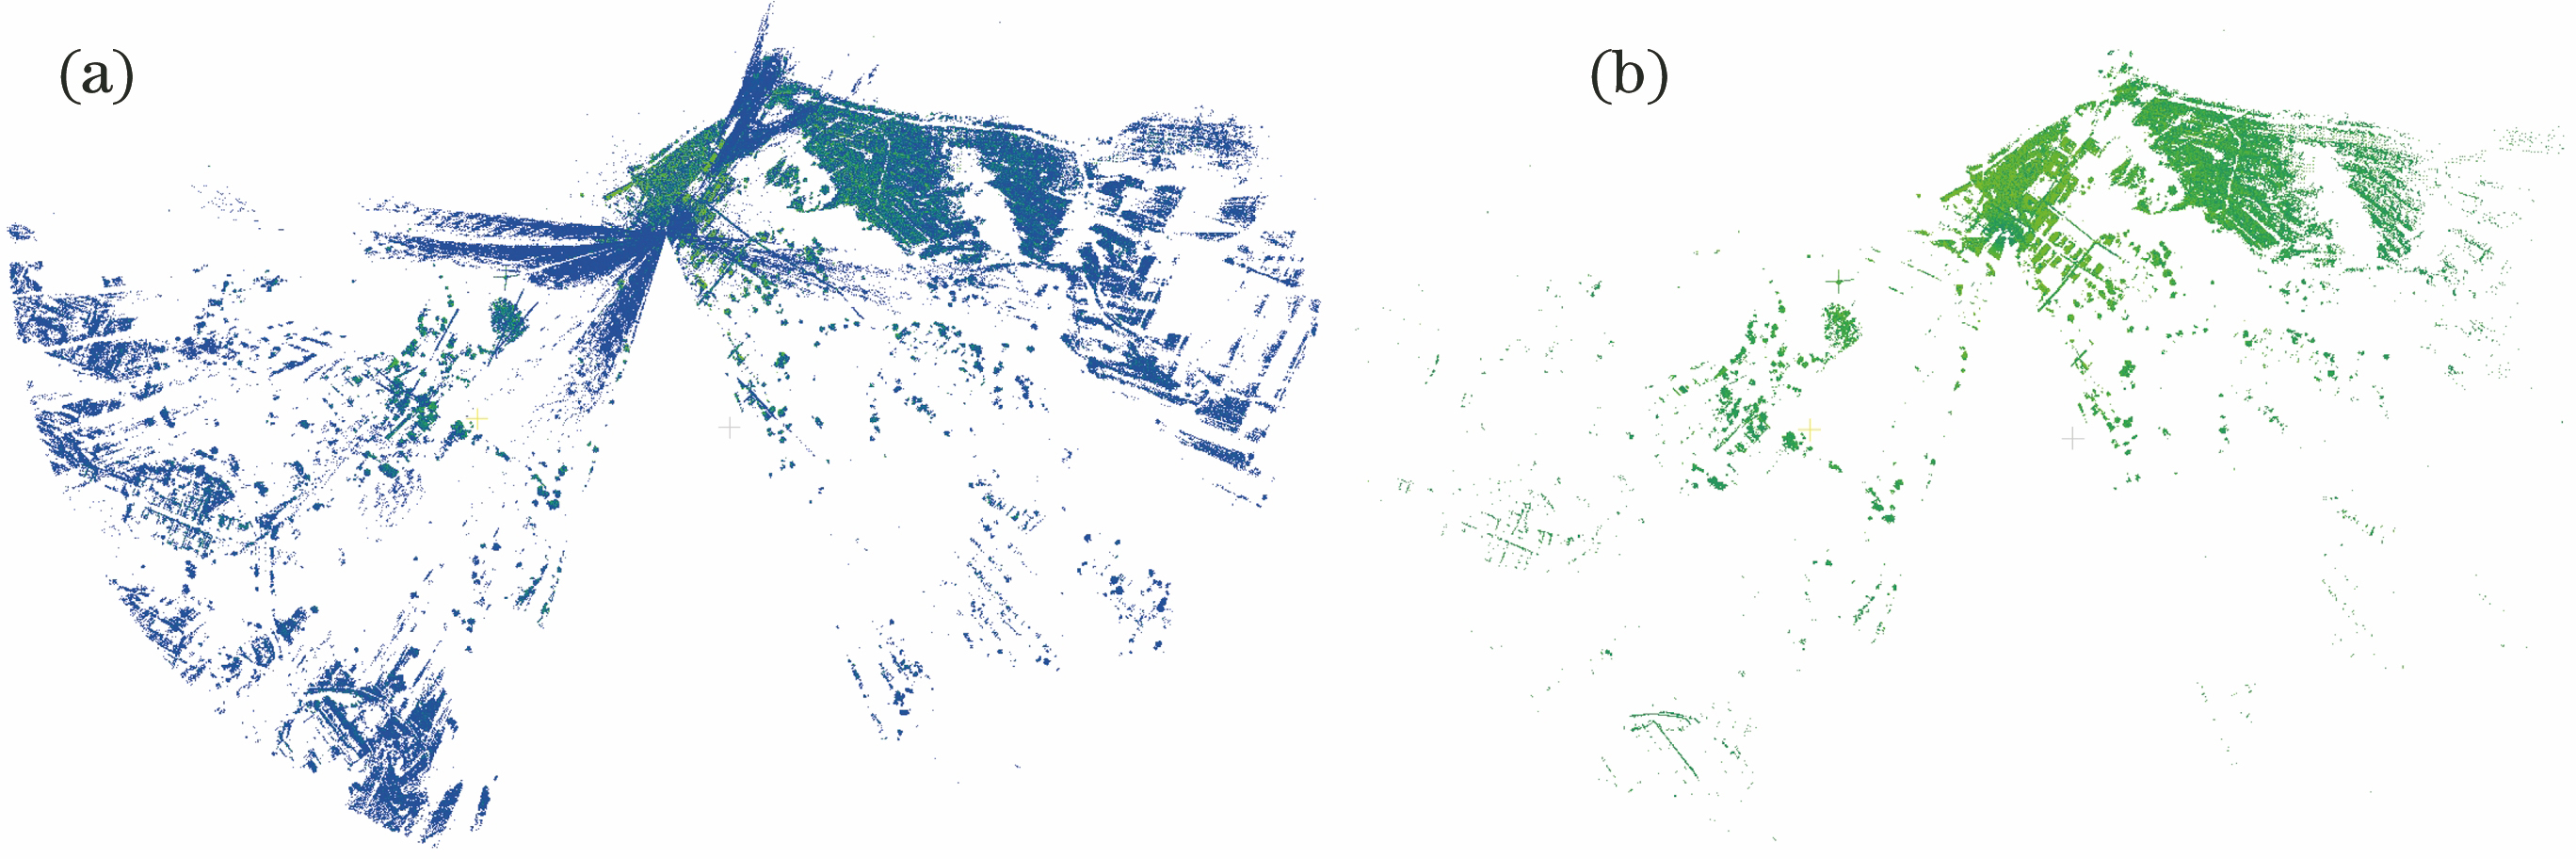 Intensity map of point cloud. (a) All point clouds; (b) point clouds after points with intensity less than 2σ removed